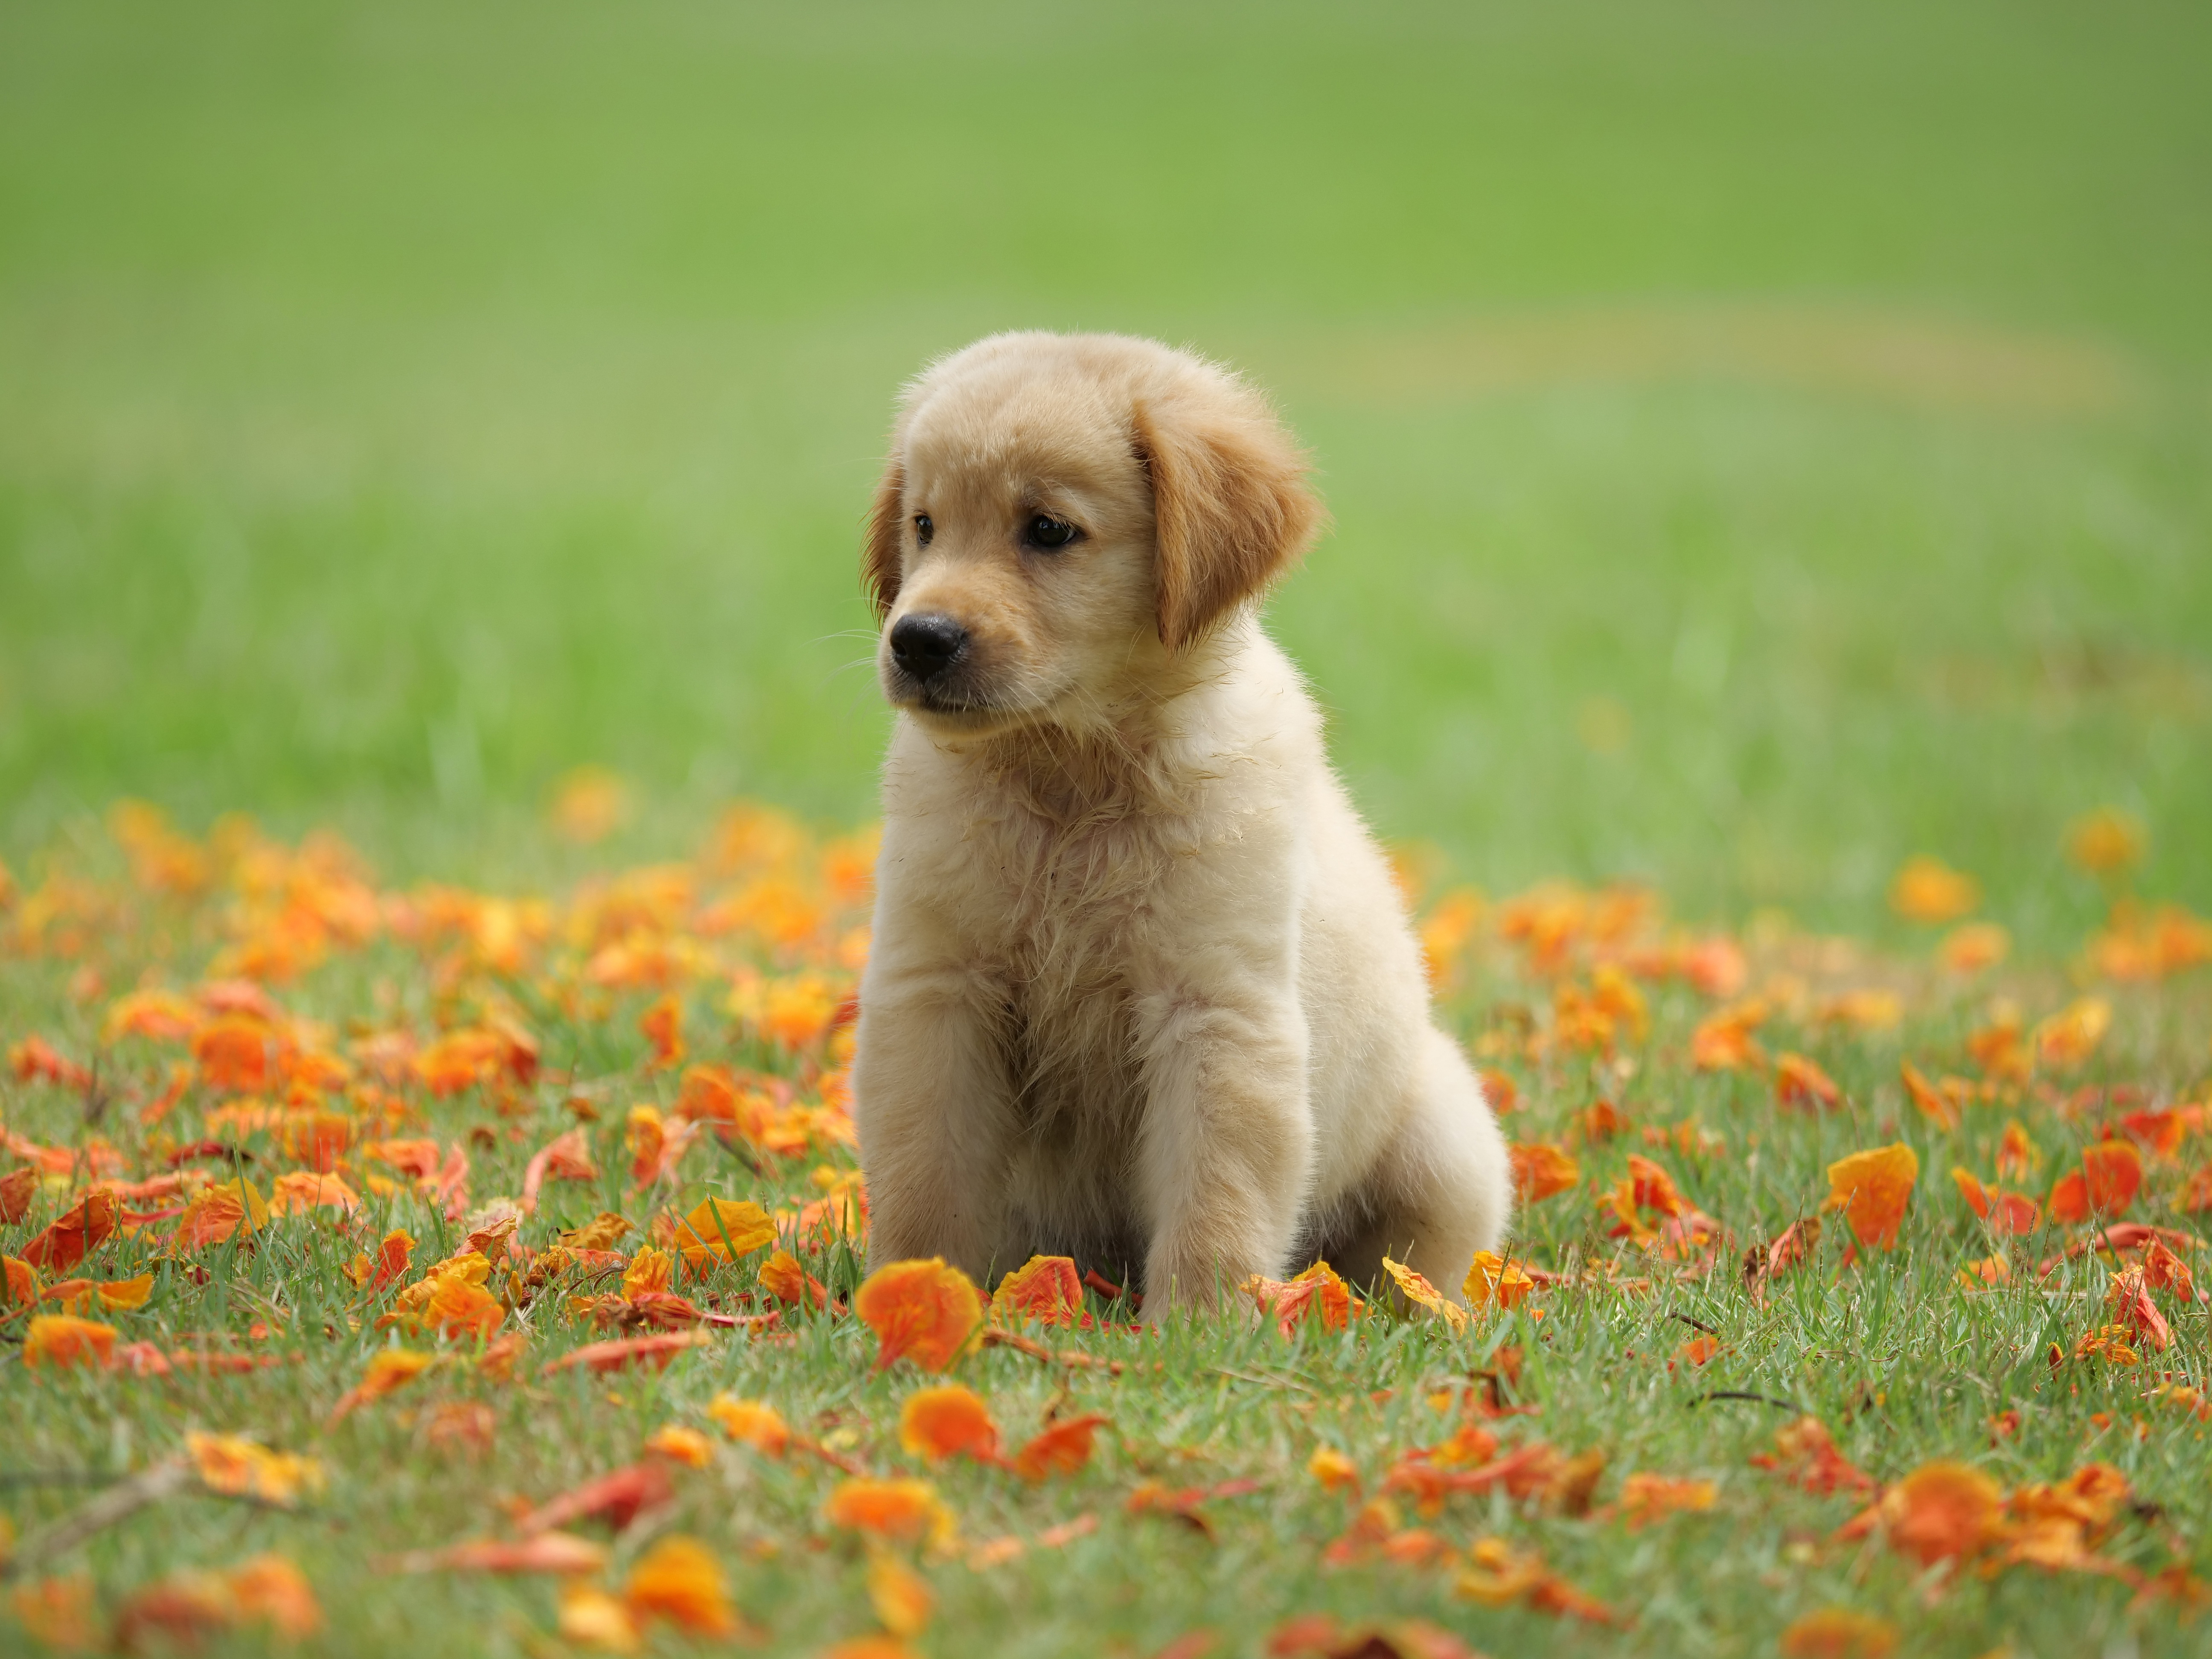 The kid in the meadow with flower petals